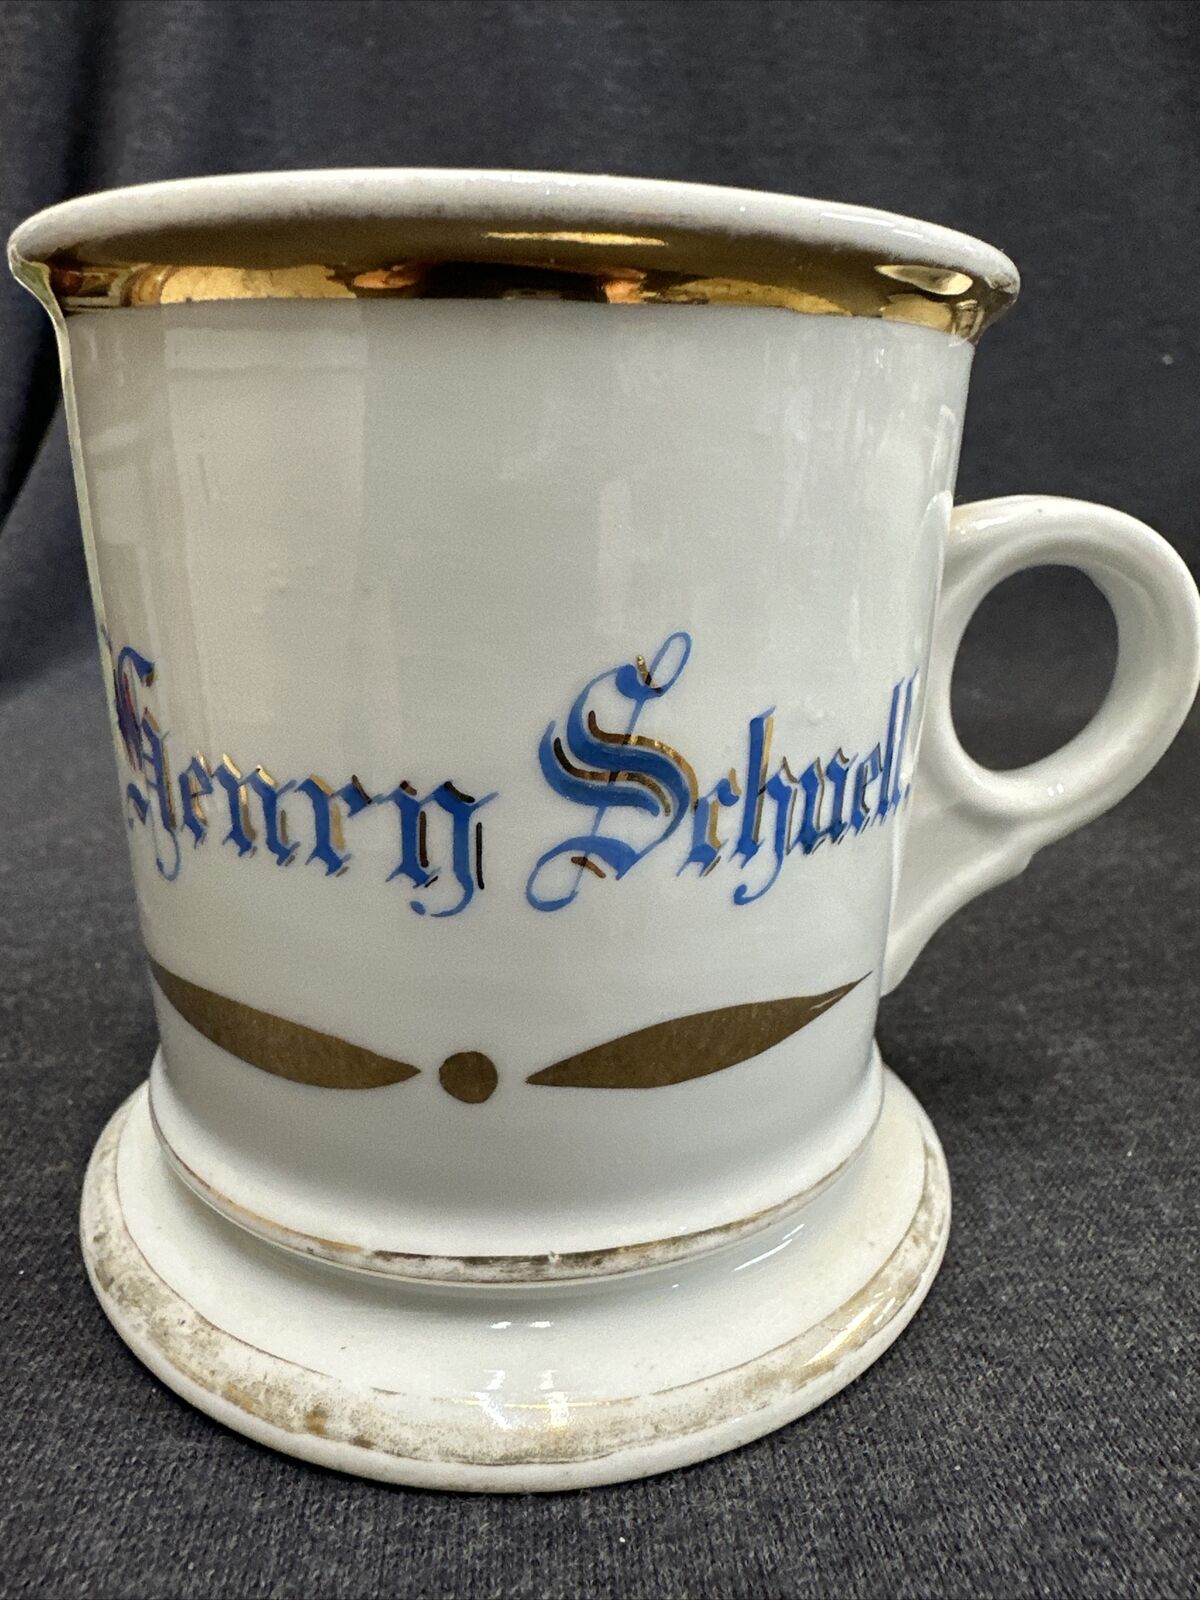 ANTIQUE 1880-1920’s Personalized SHAVING MUG - Henry Schnell